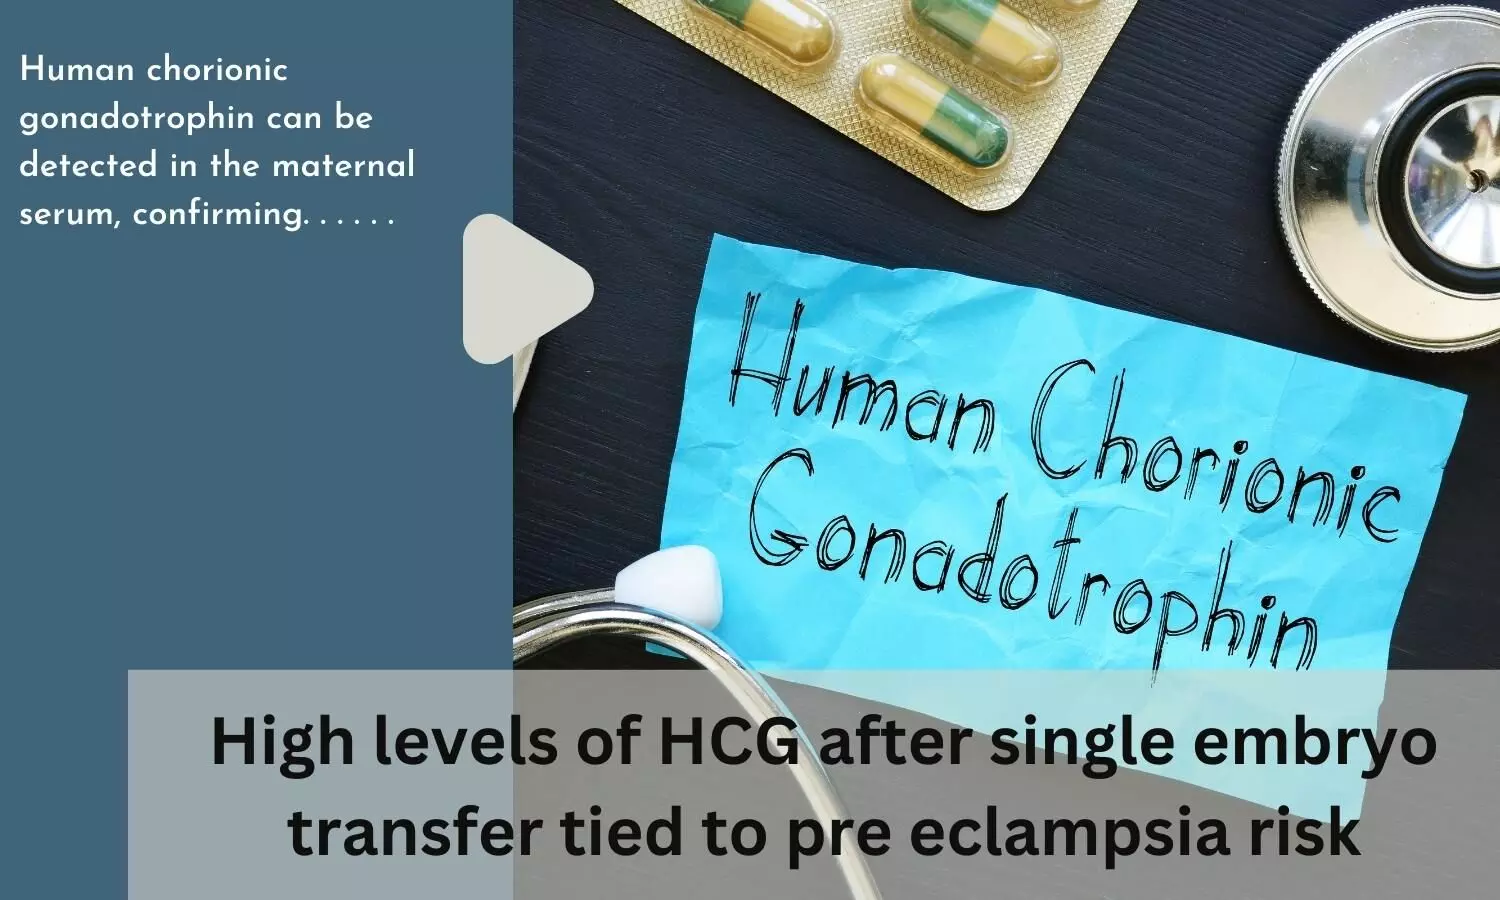 High levels of HCG after single embryo transfer tied to pre eclampsia risk